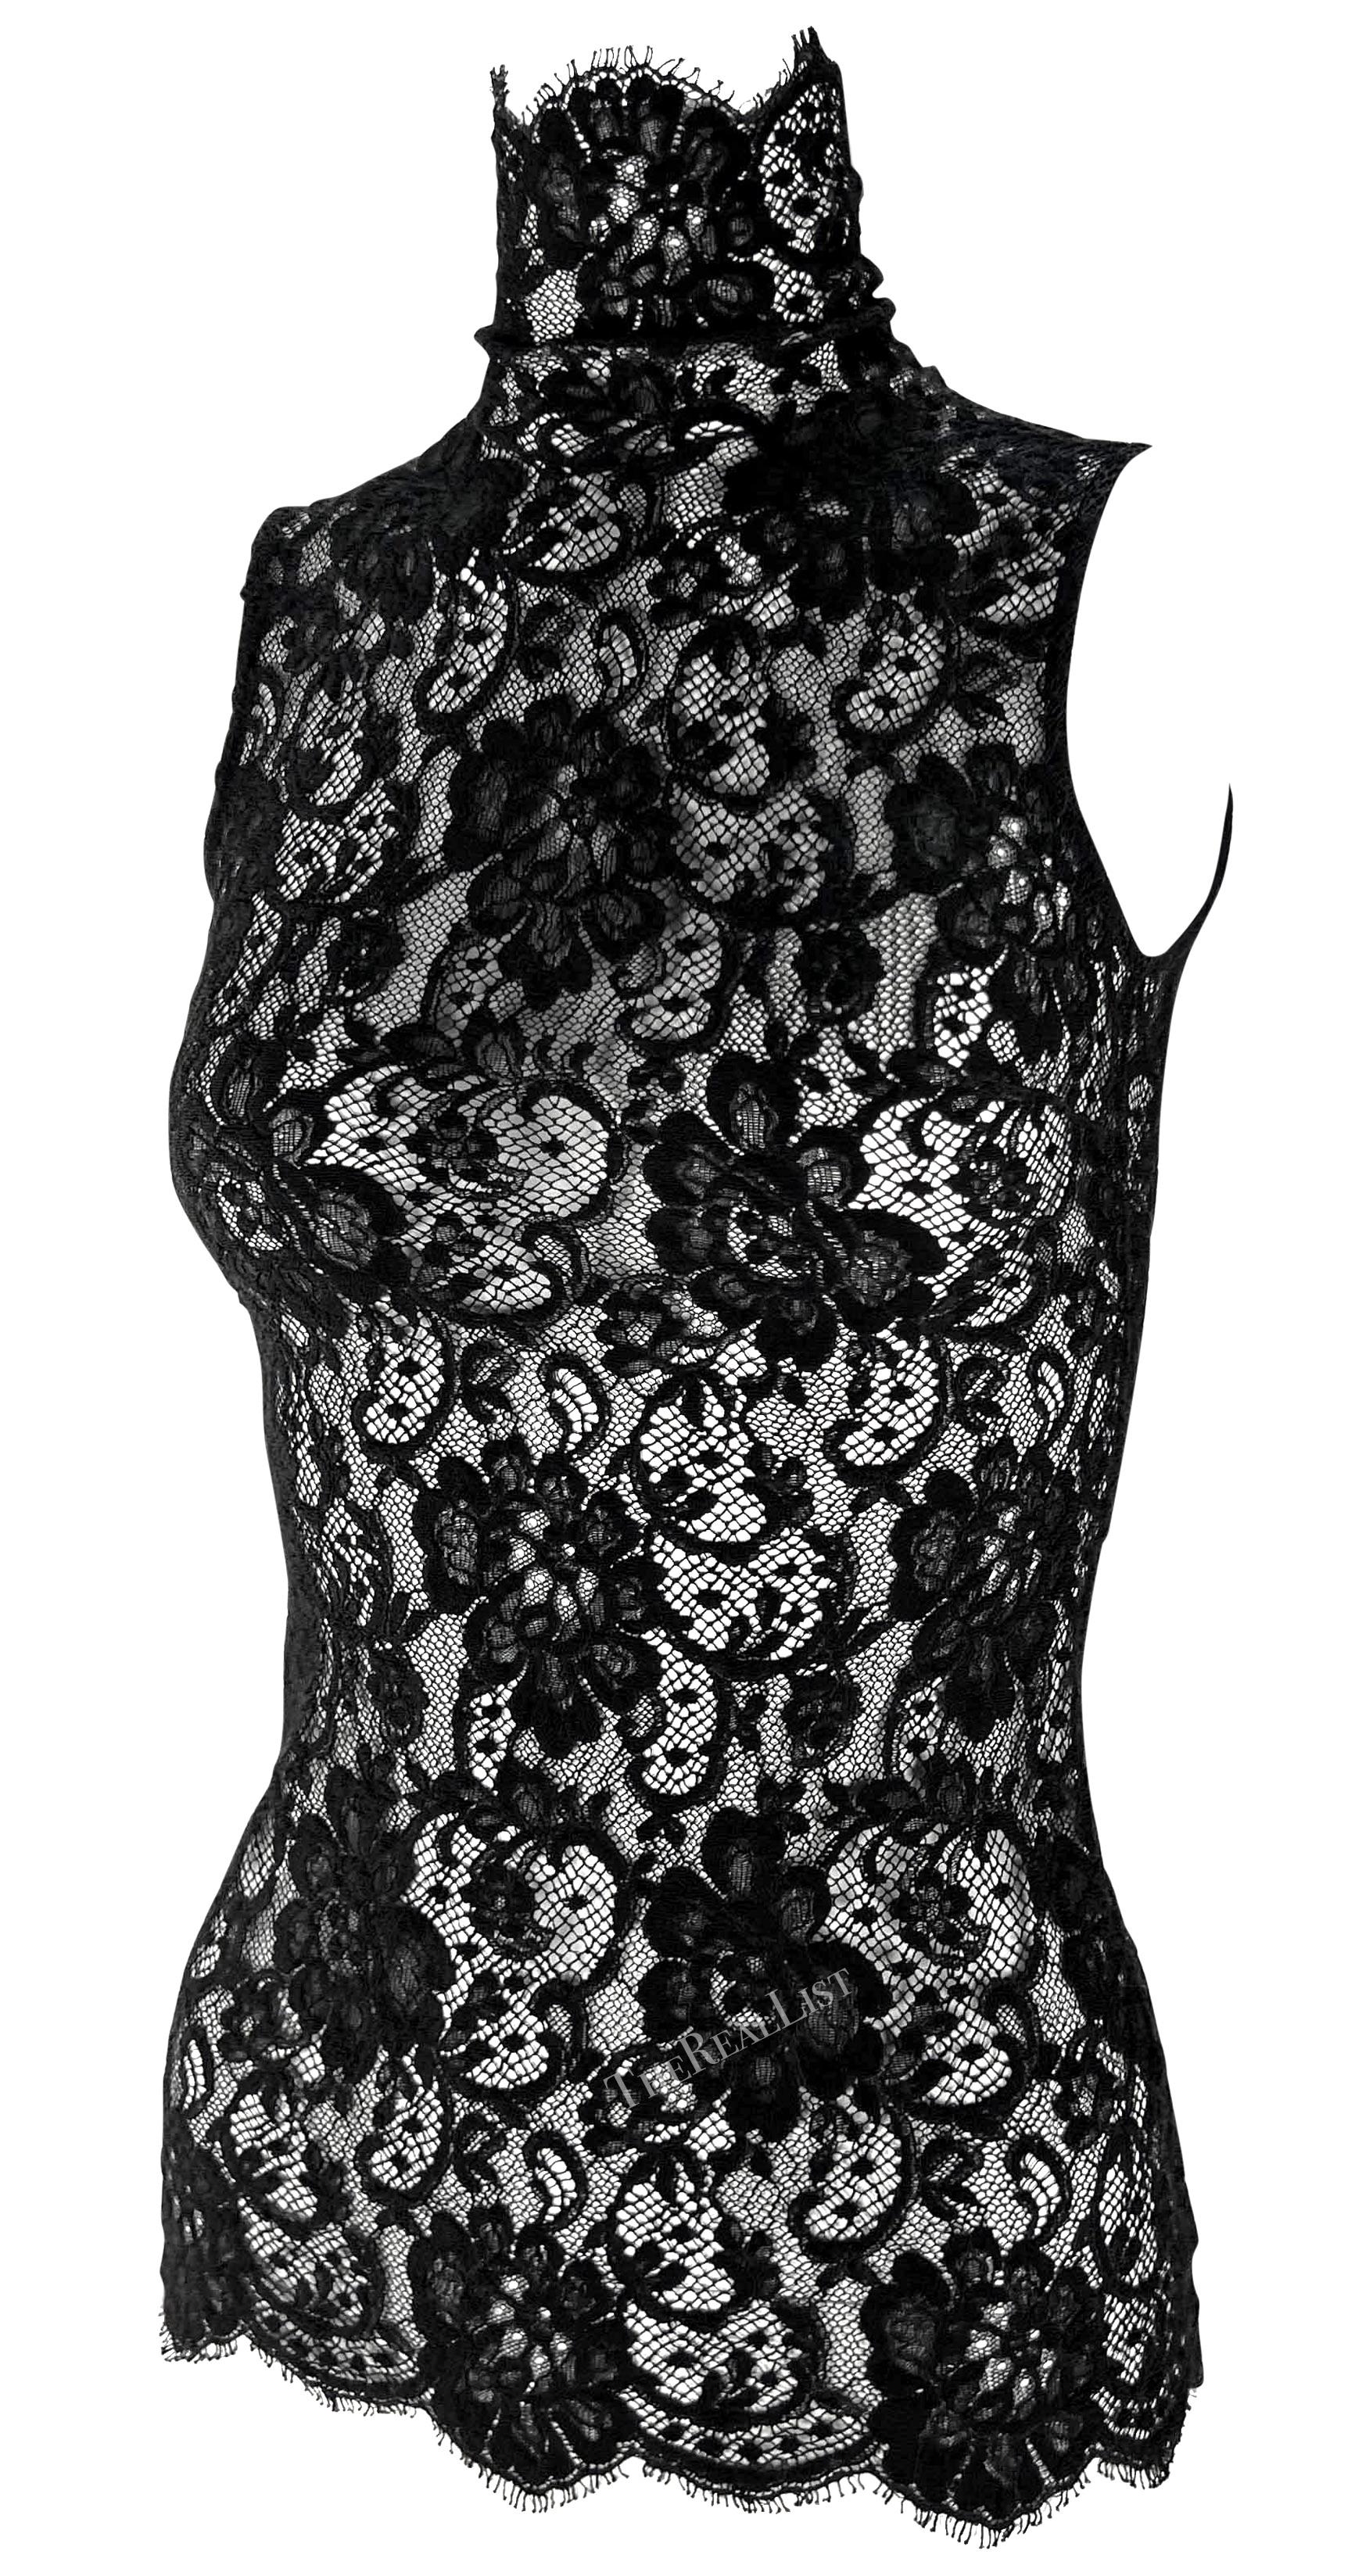 F/W 2002 Dolce & Gabbana Sheer Lace Black Mock Neck Sleeveless Top In Excellent Condition For Sale In West Hollywood, CA